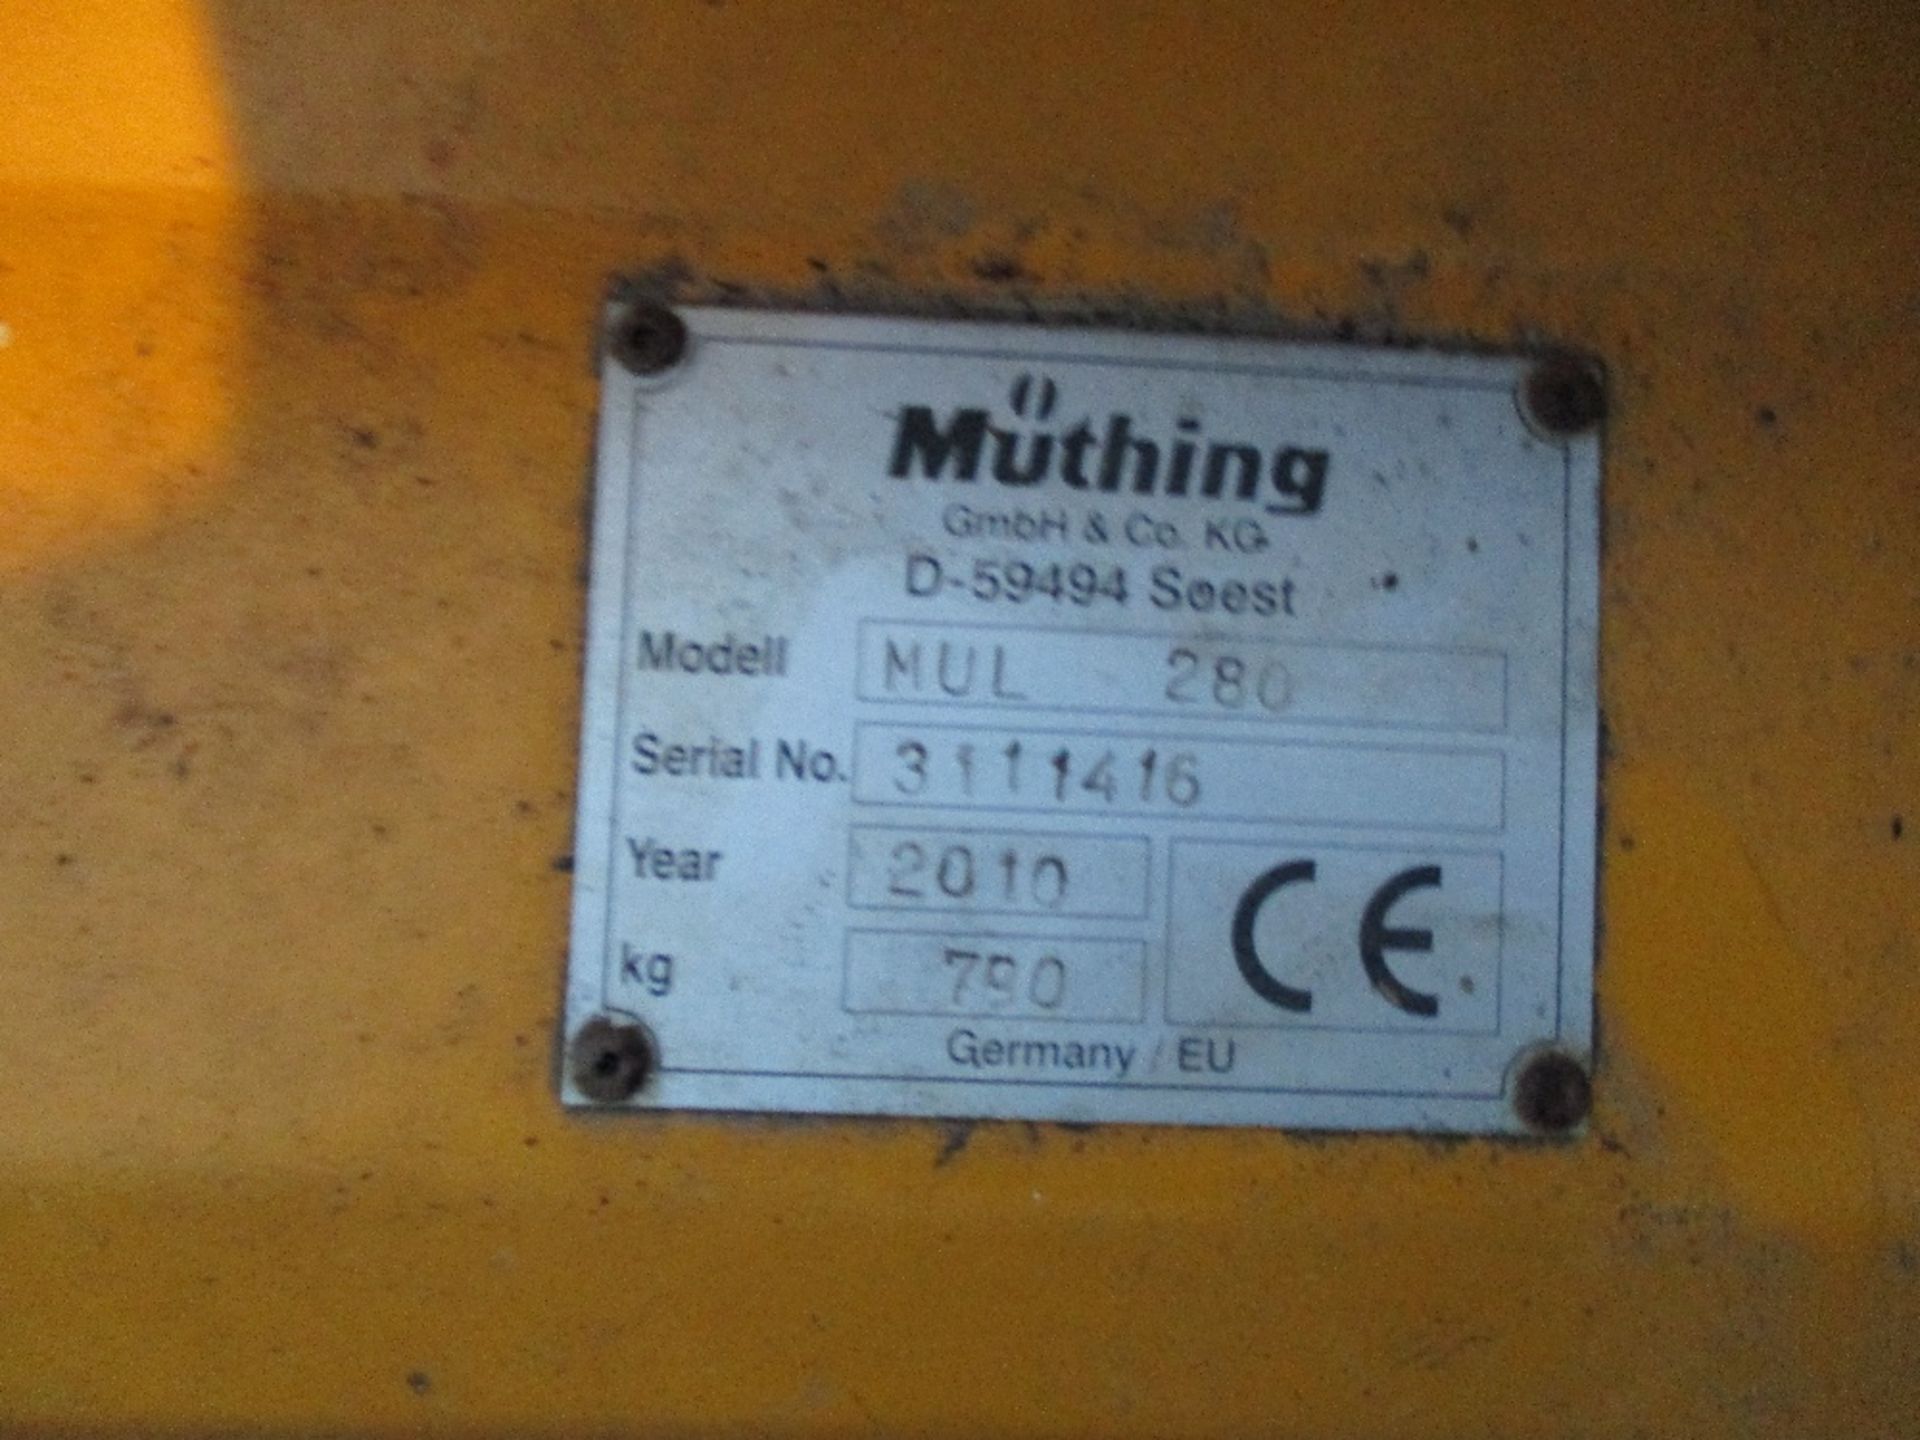 MUTHING MUL 280 FRONT OR REAR DRIVE OFFSET FLAIL MOWER YEAR 2010 BUILD - Image 8 of 8